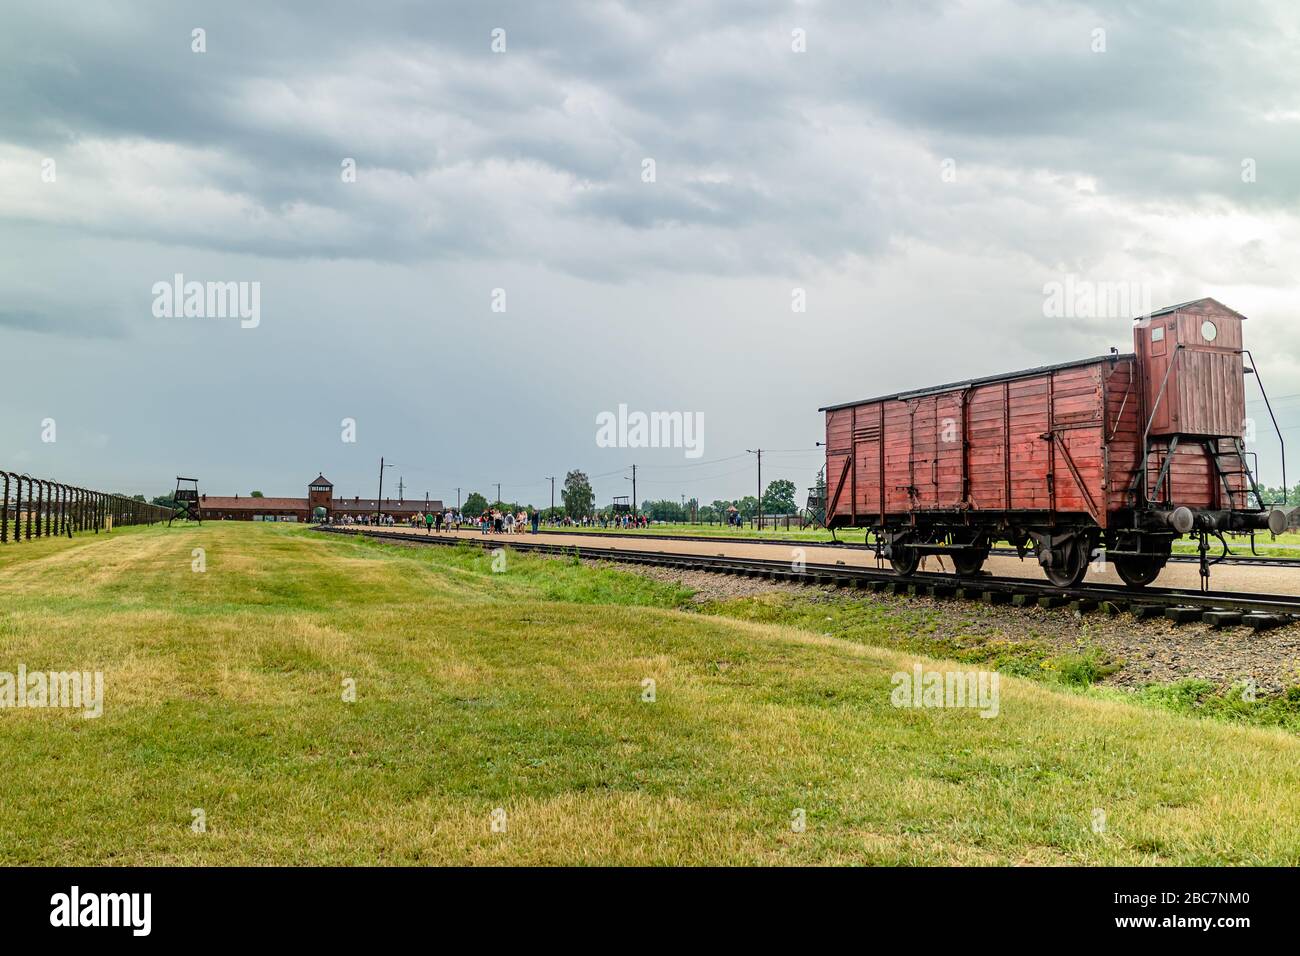 A railway wagon inside the entrance of the 1940s Auschwitz-Birkenau concentration camp, now preserved in memorial. Oswiecim, Poland. July 2017. Stock Photo